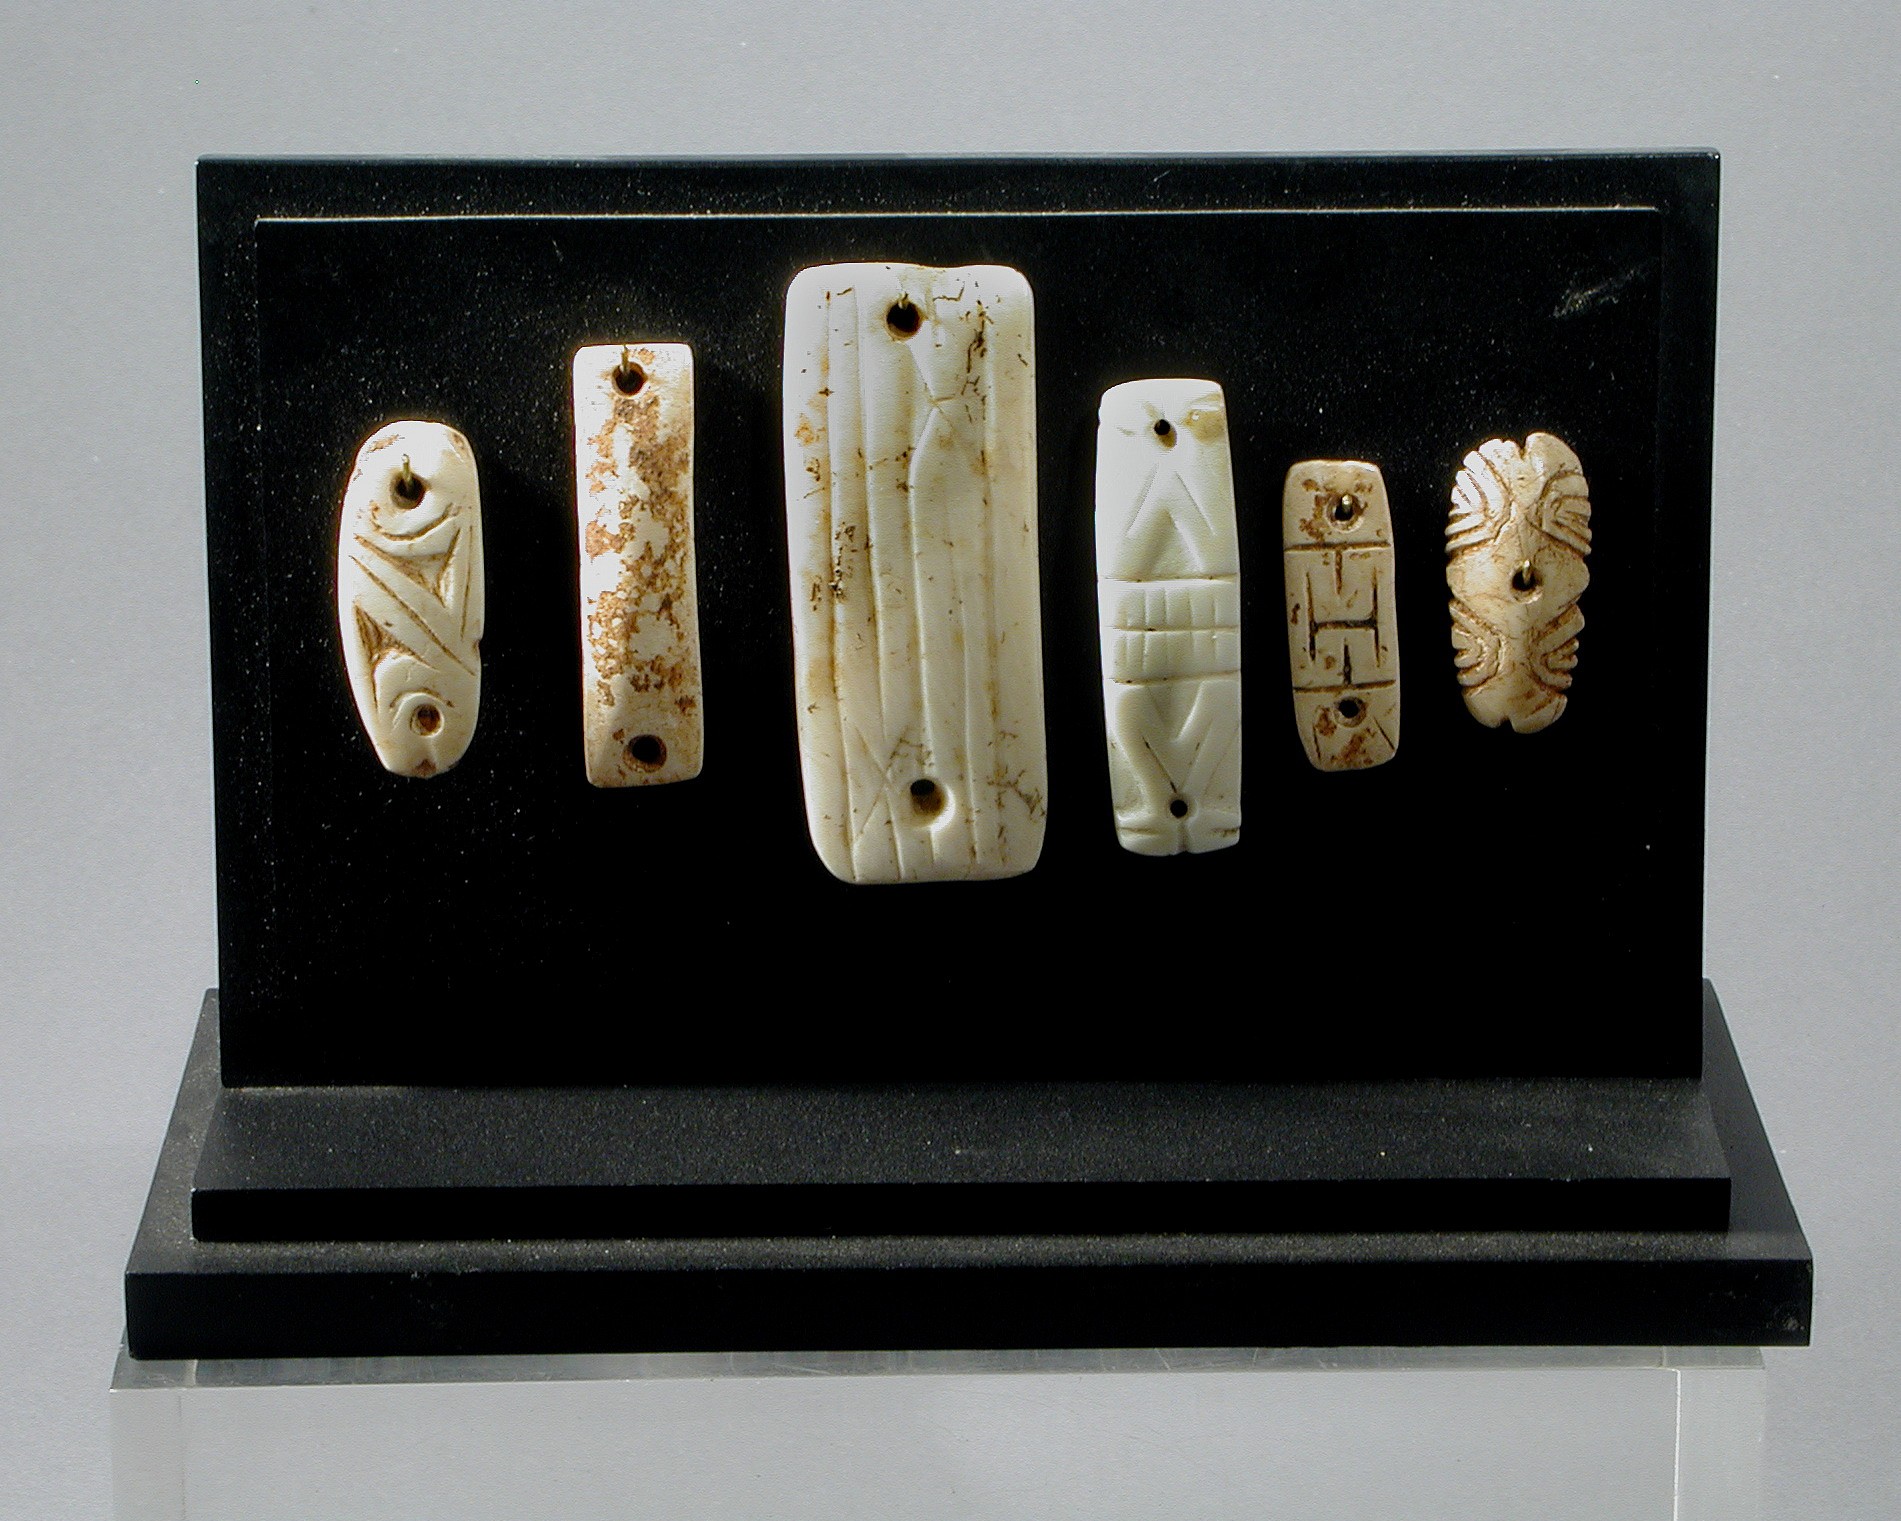 Dominican Republic, Six Taino Bone and Shell Bracelet Elements
These ornaments have two drilled holes at either end.  They were used as either bracelet elements or necklace clasps.  It is hard to find shell ornaments with such good patina still intact.
Media: Shell
Dimensions: From left: 1 1/4, 1 3/4", 2.5", 1.5", 1 1/4", 1"
$2,400
98372B